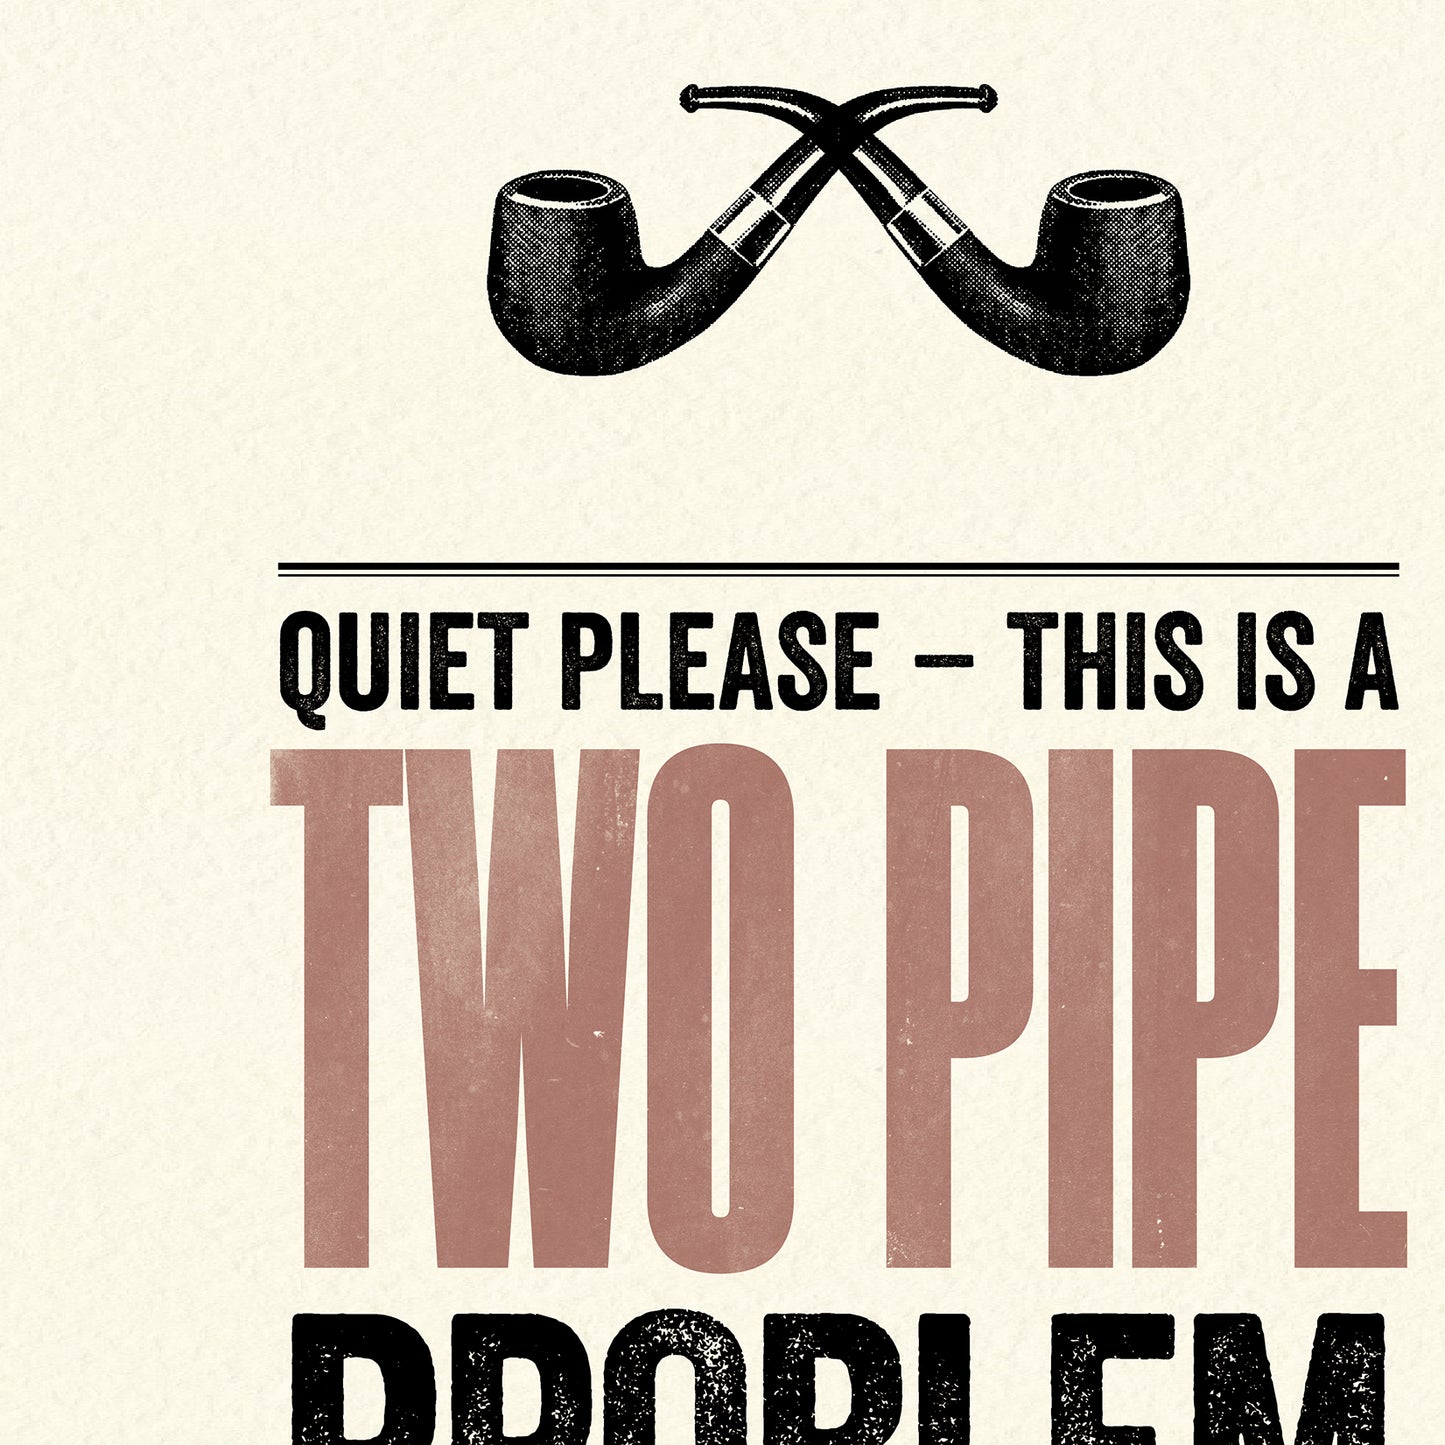 Modern Life A3 print: Two Pipe Problem